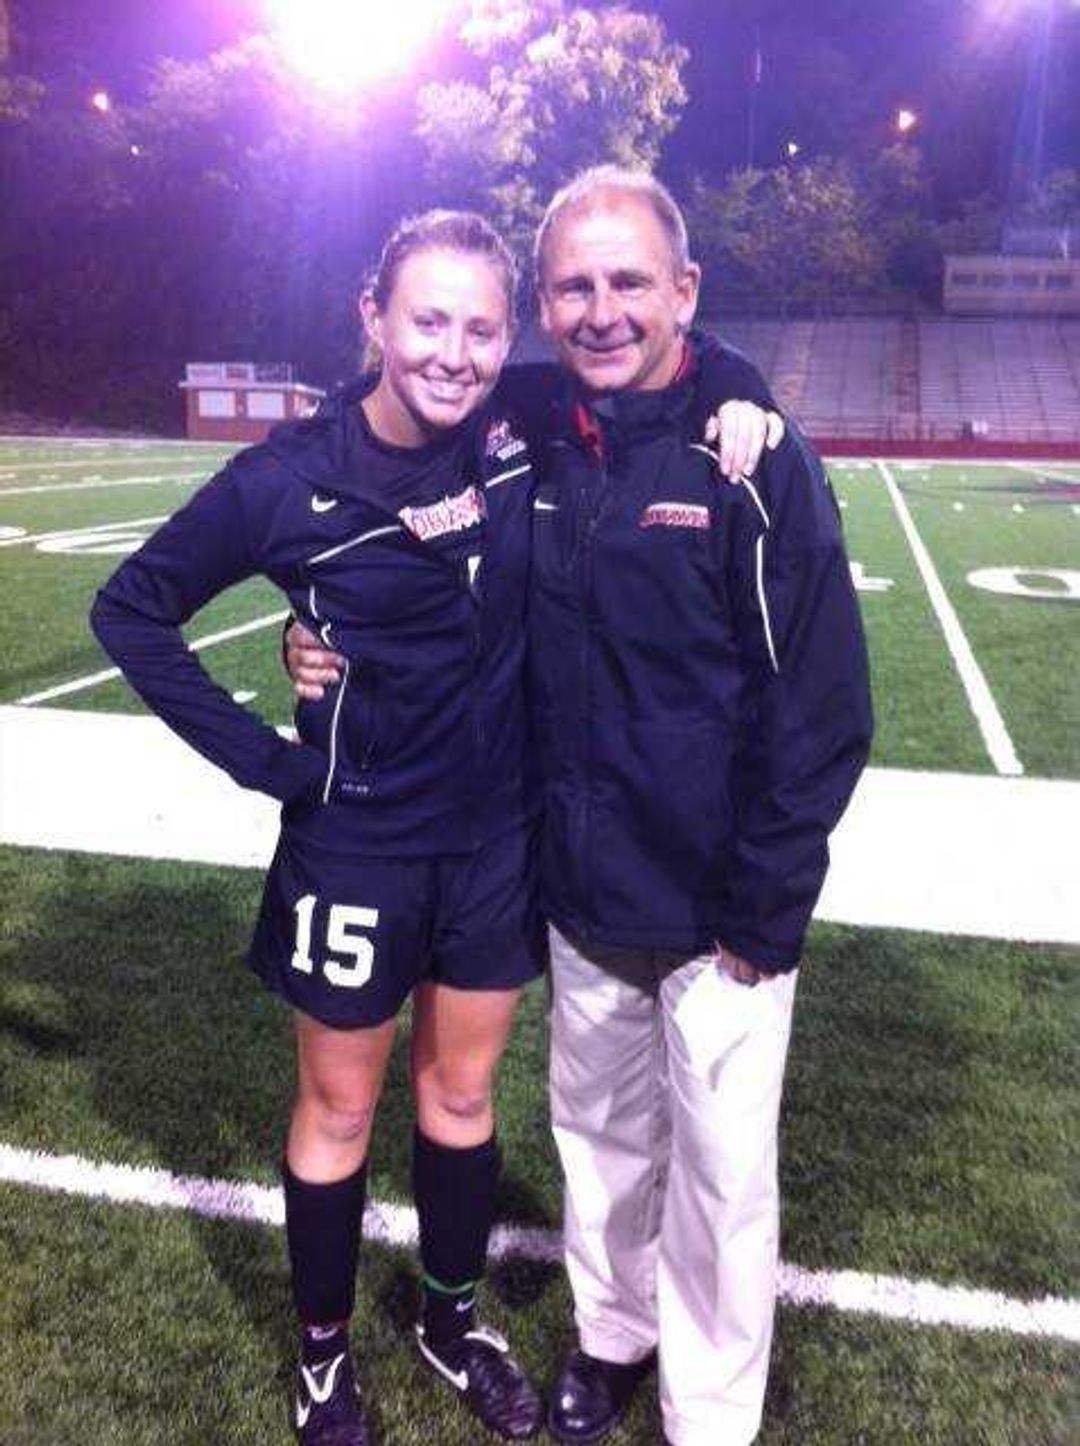 Sarah Uptmor and associate head coach of soccer
team Paul Nelson.  Submitted Photo